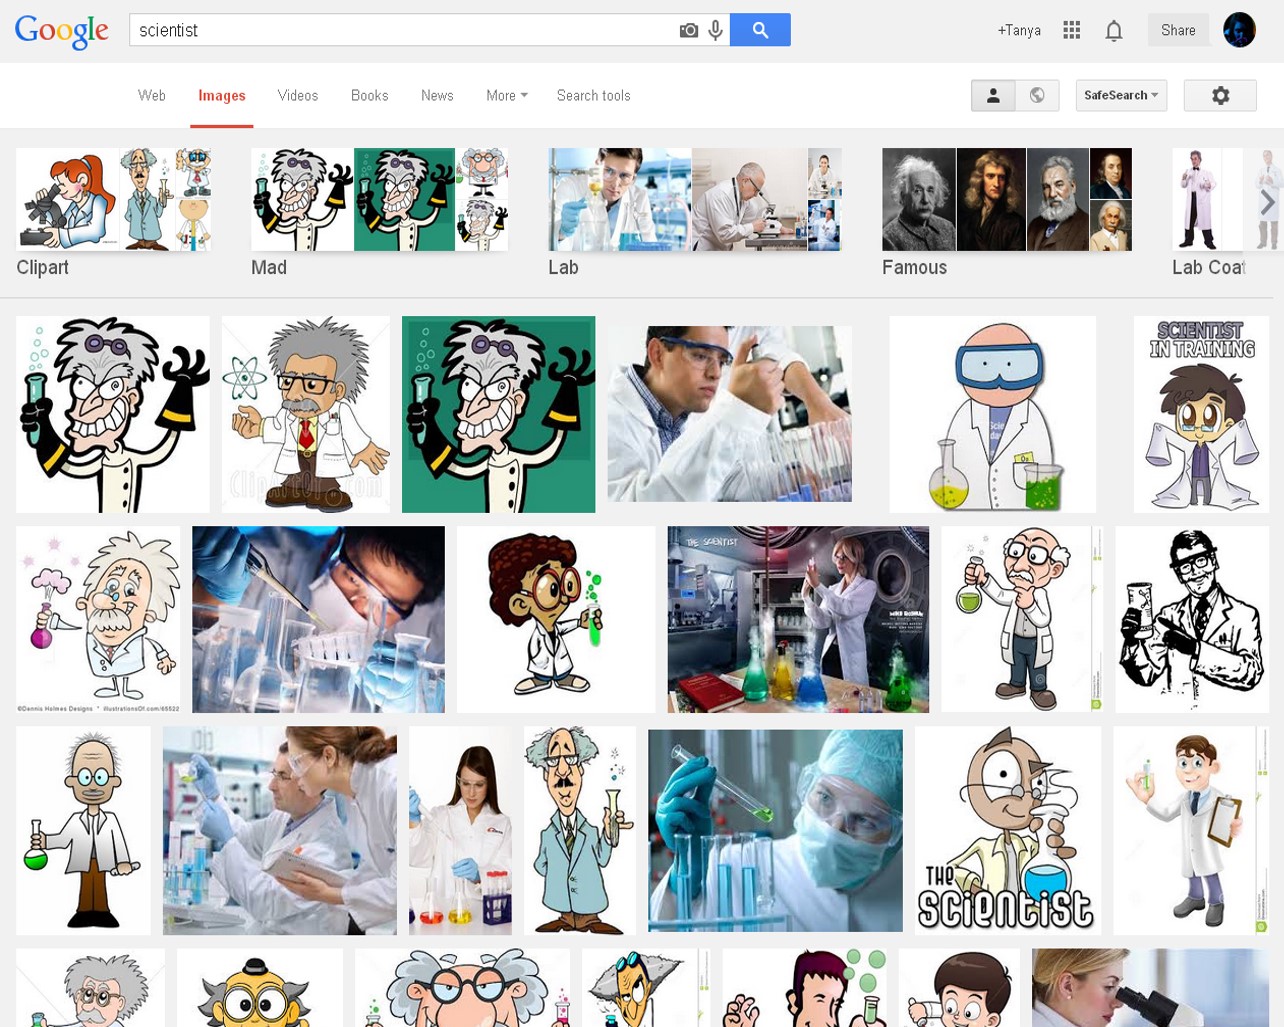 Google Image search for ‘scientist’ showing stereotypical images and cartoons of a 'mad scientist'.